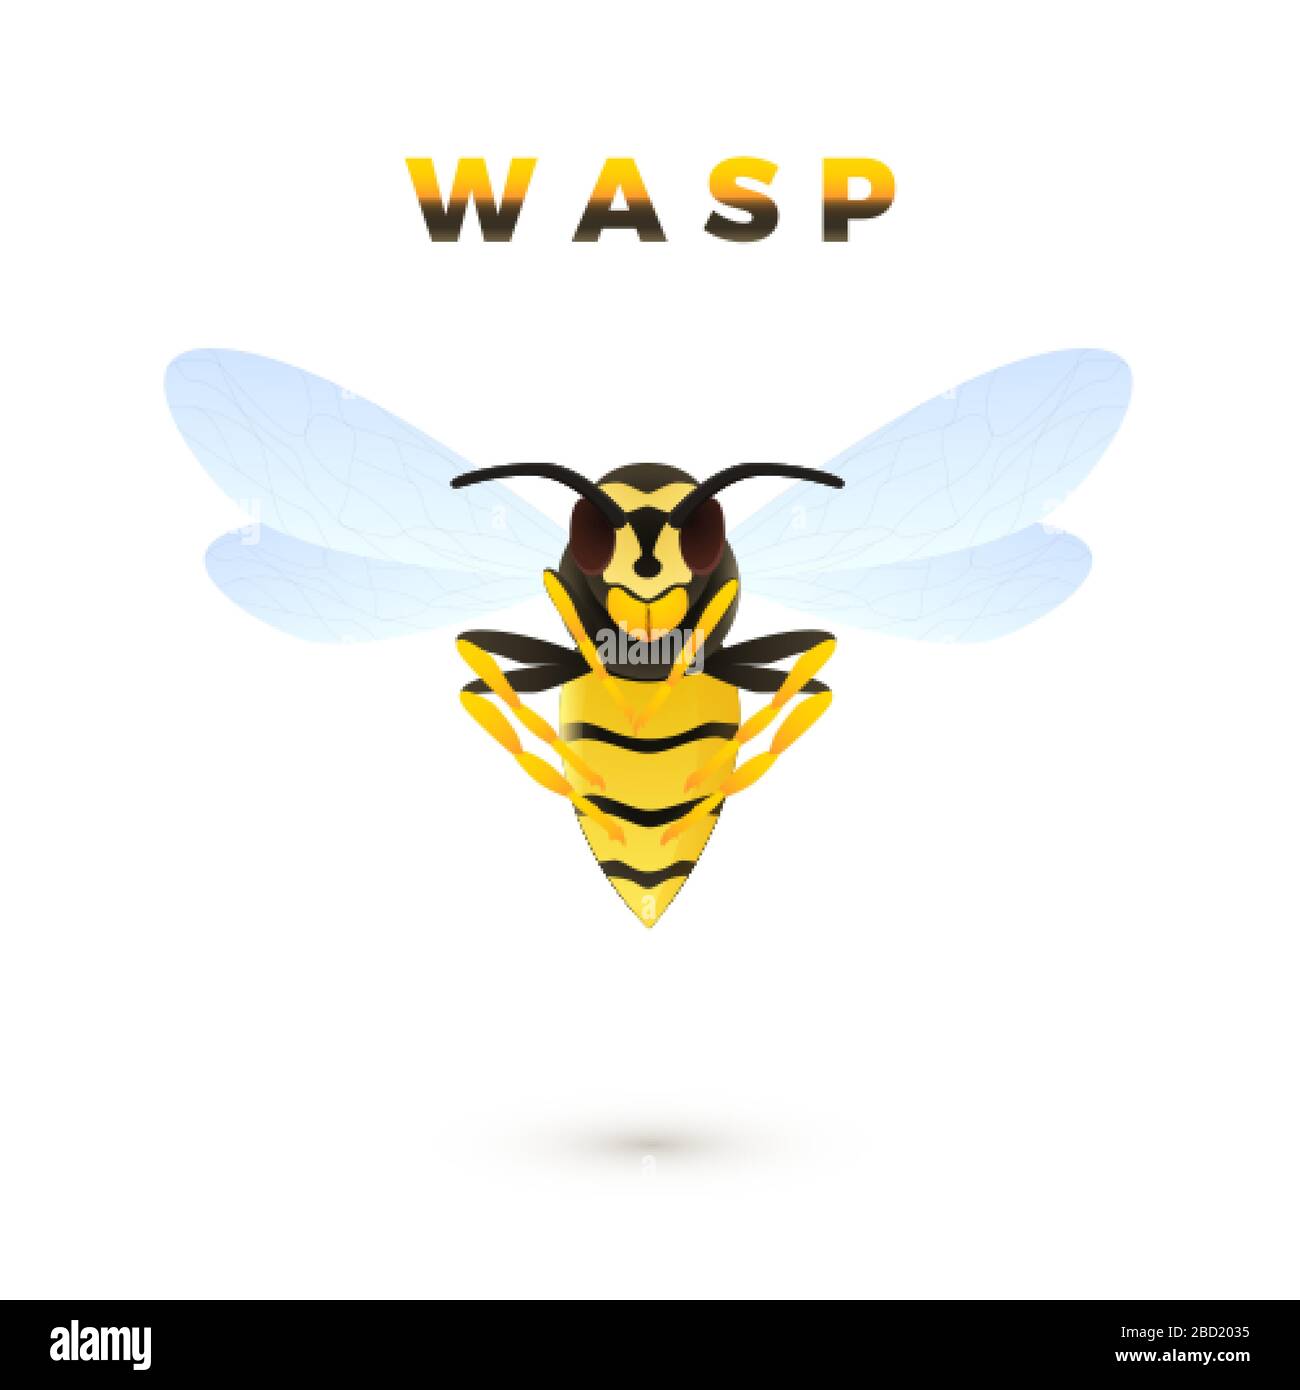 Wasp cartoon illustration isolated on white background. Predatory insect. Yellow striped wasp. Vector Stock Vector